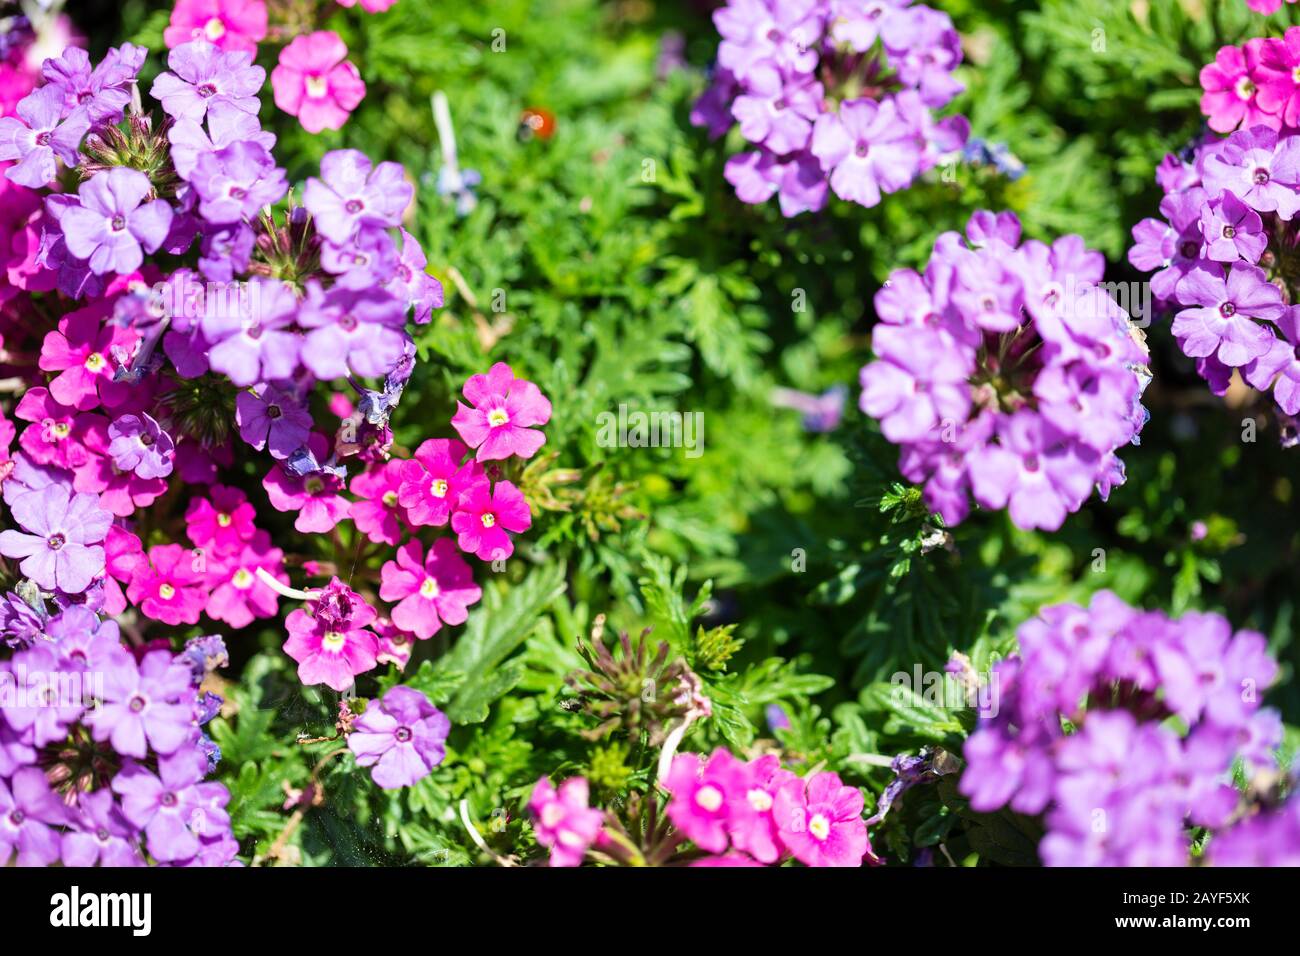 Small pink flowers close up, small depth of field Stock Photo